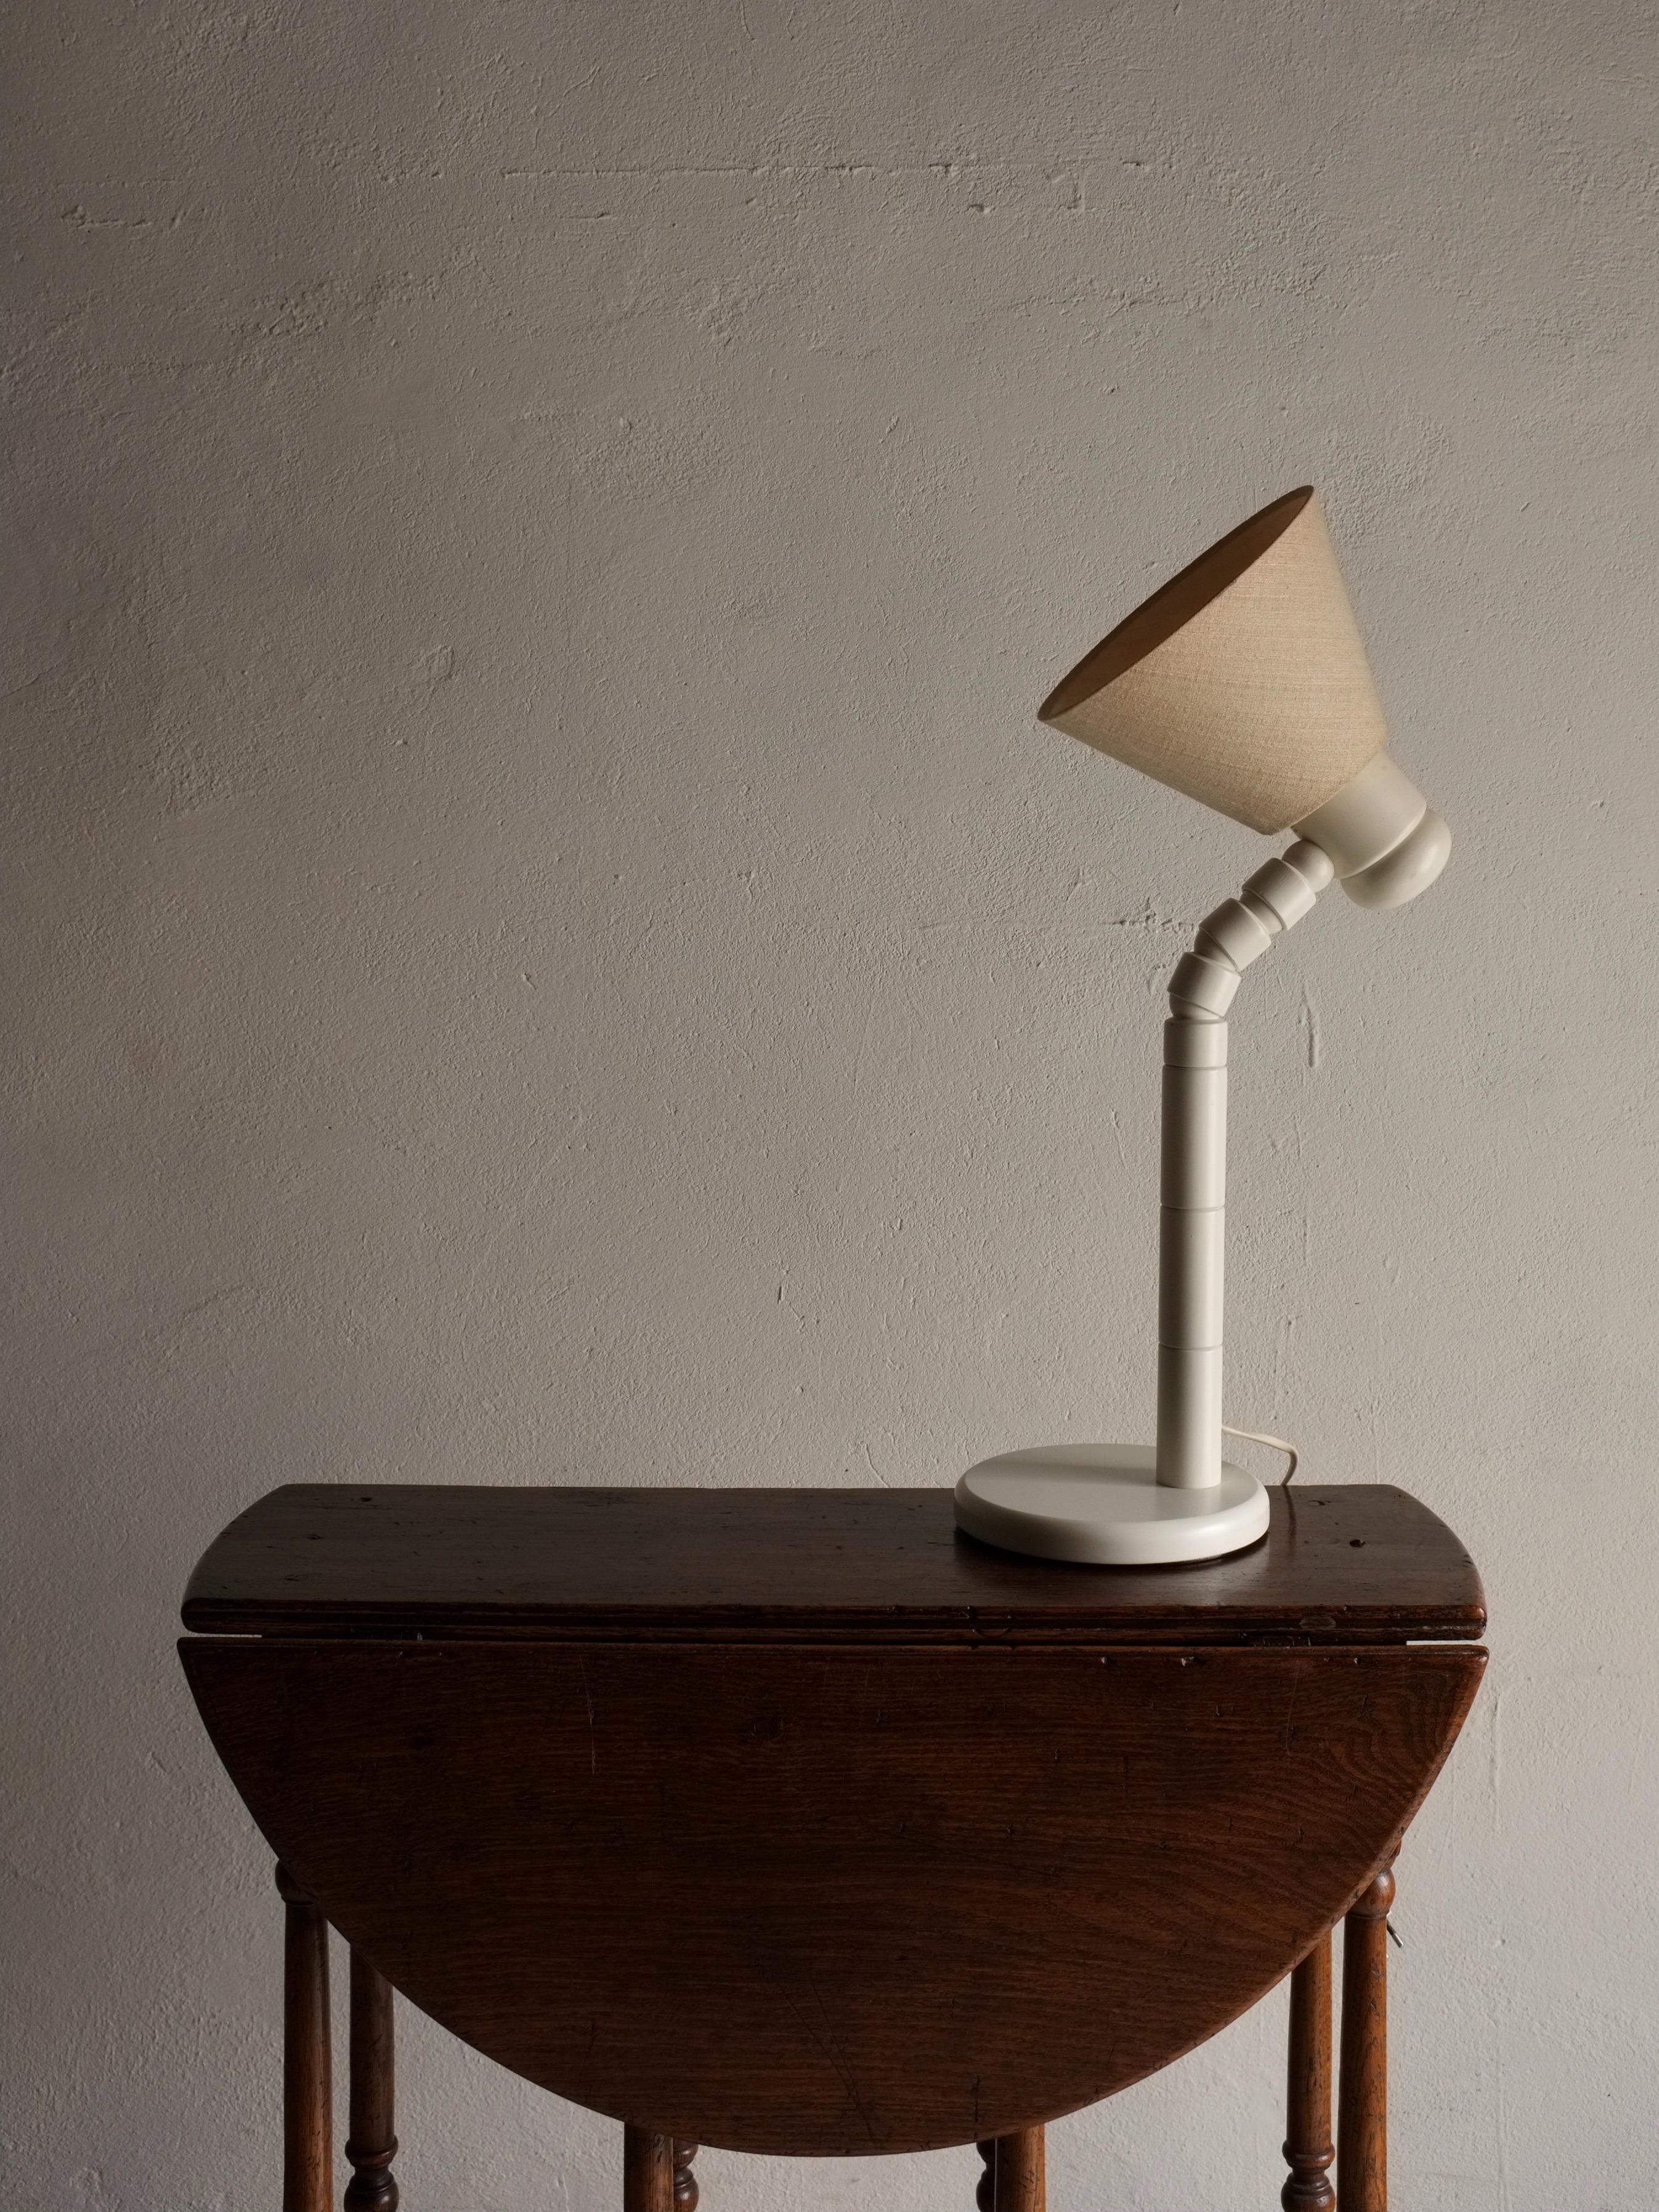 Vintage carved wood table lamp with a flexible shade.

Additional information:
Country of manufacture: Sweden
Design/Manufacture period: 1960s
Dimensions: 17/19 D (base/shade) x 46 H cm
Condition: Good vintage condition 